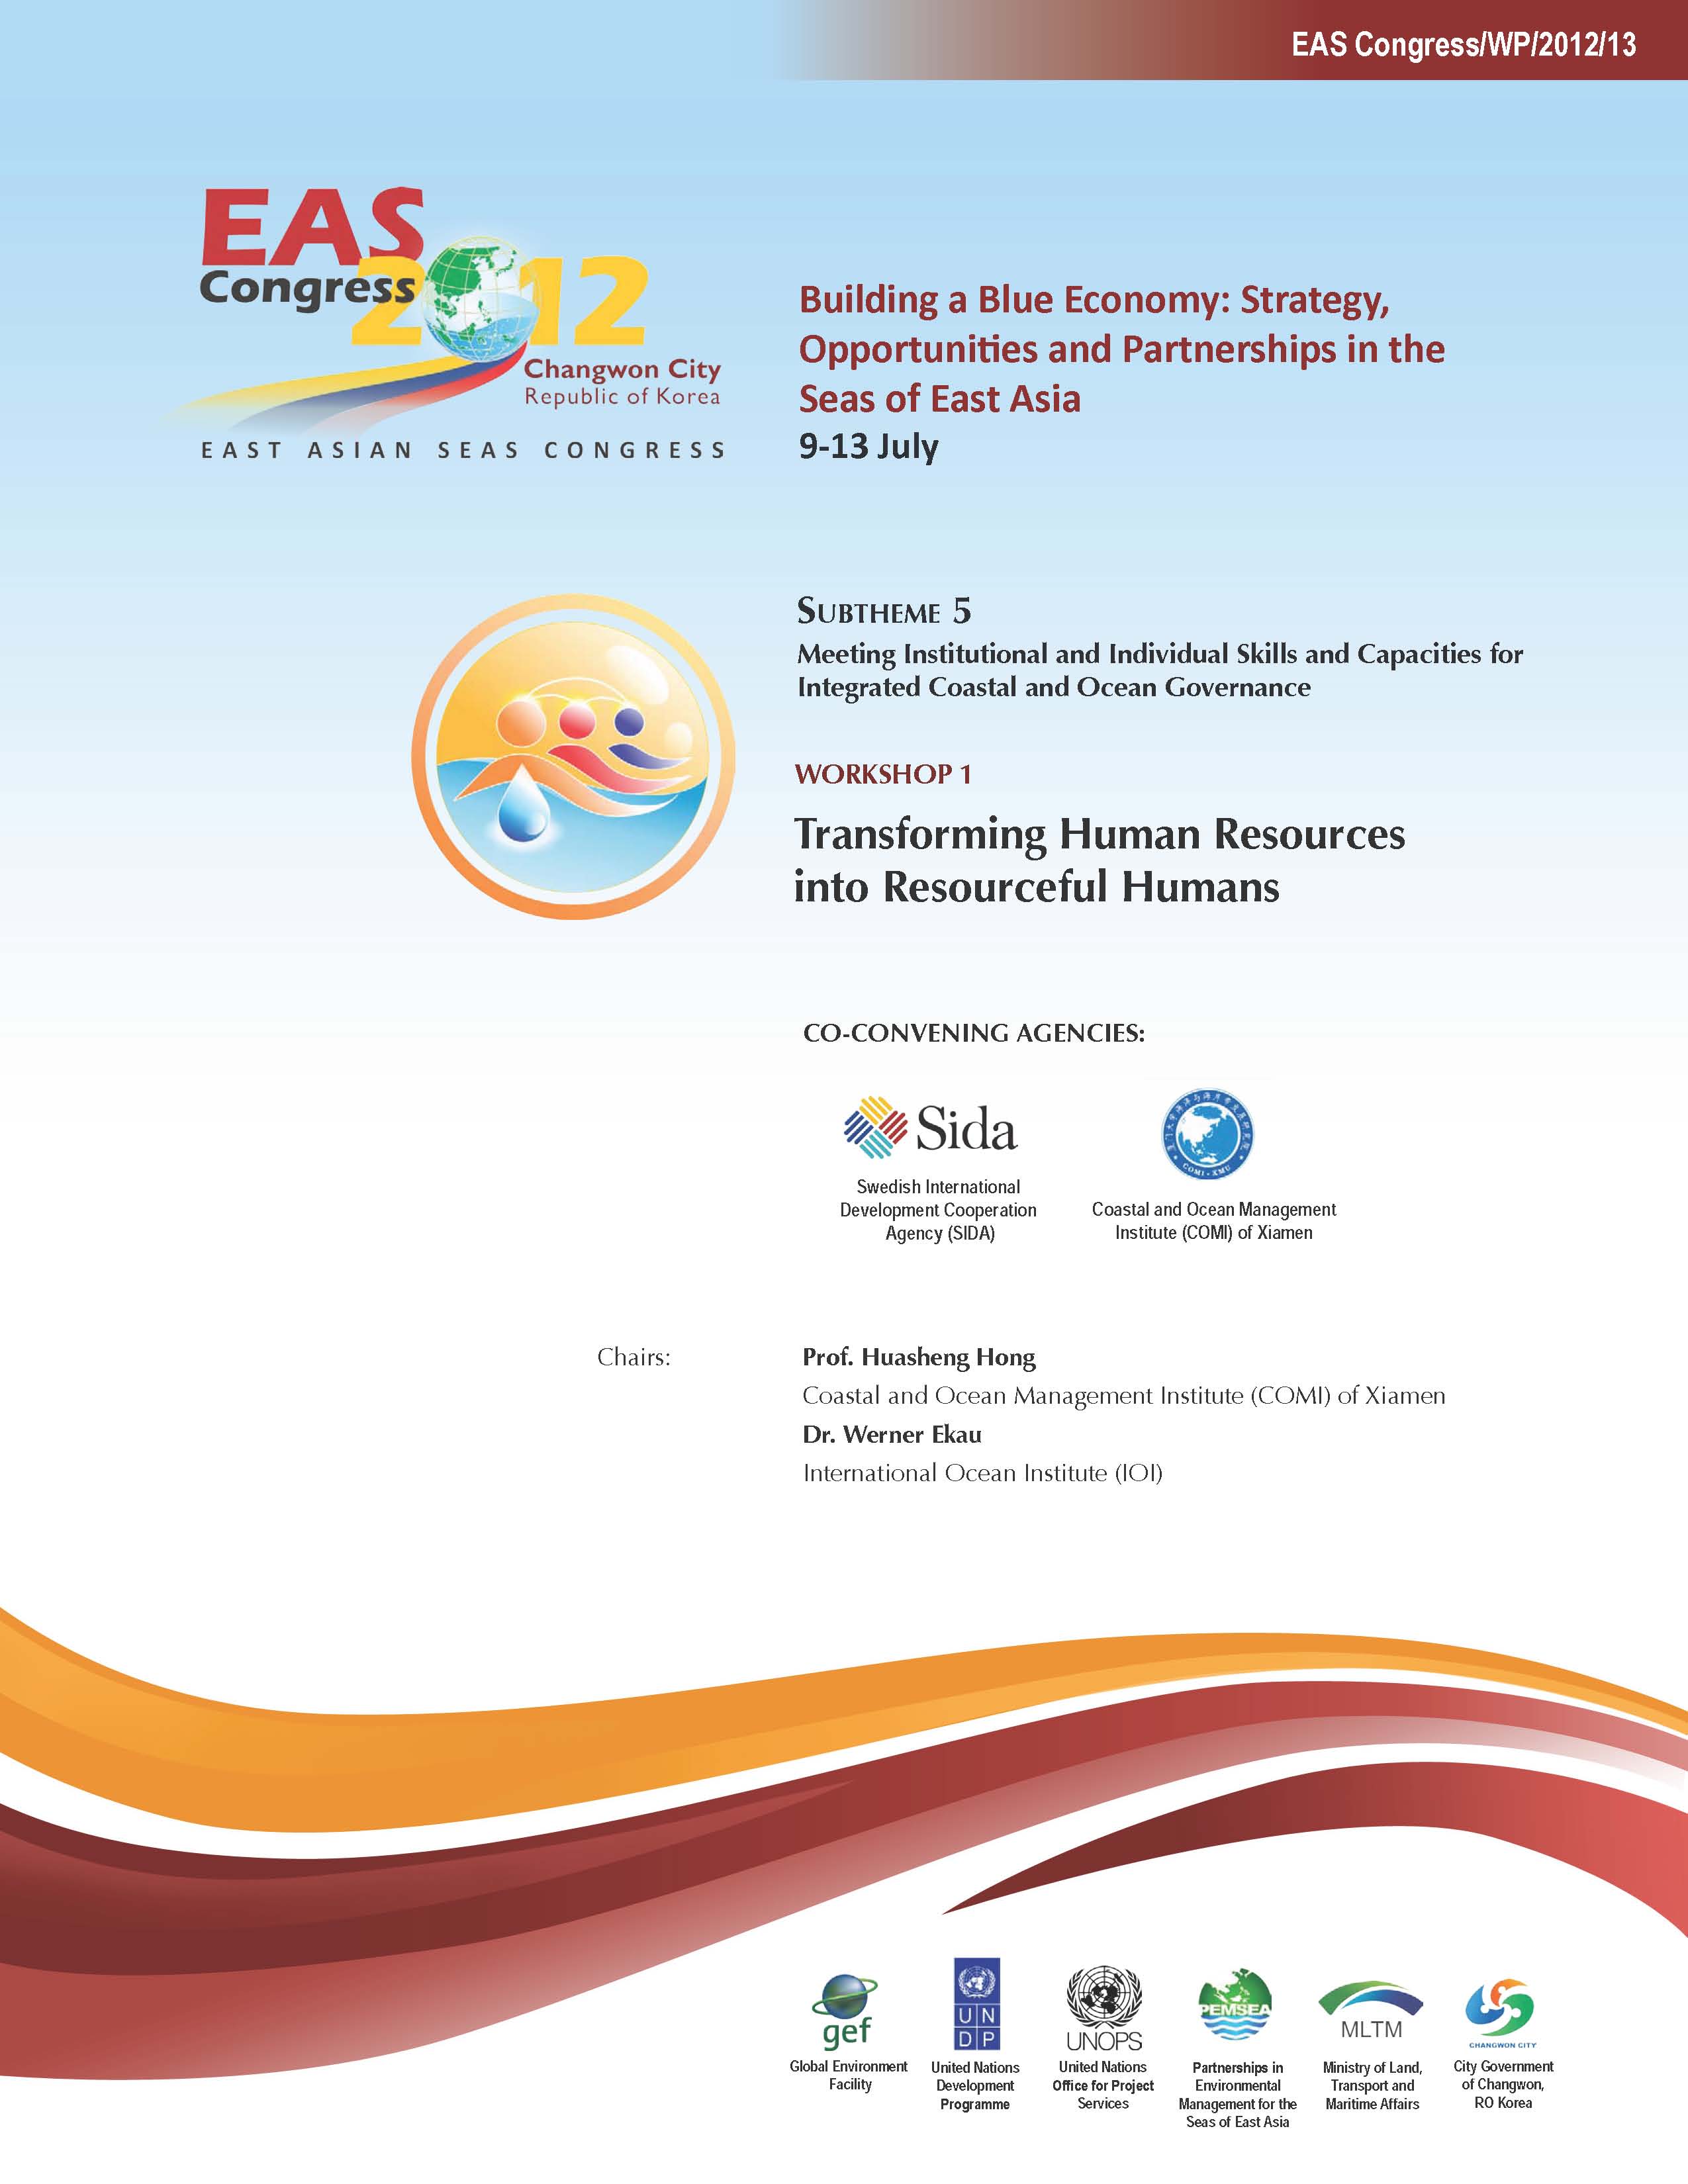 Proceedings of the Workshop on Transforming Human Resources into Resourceful Humans